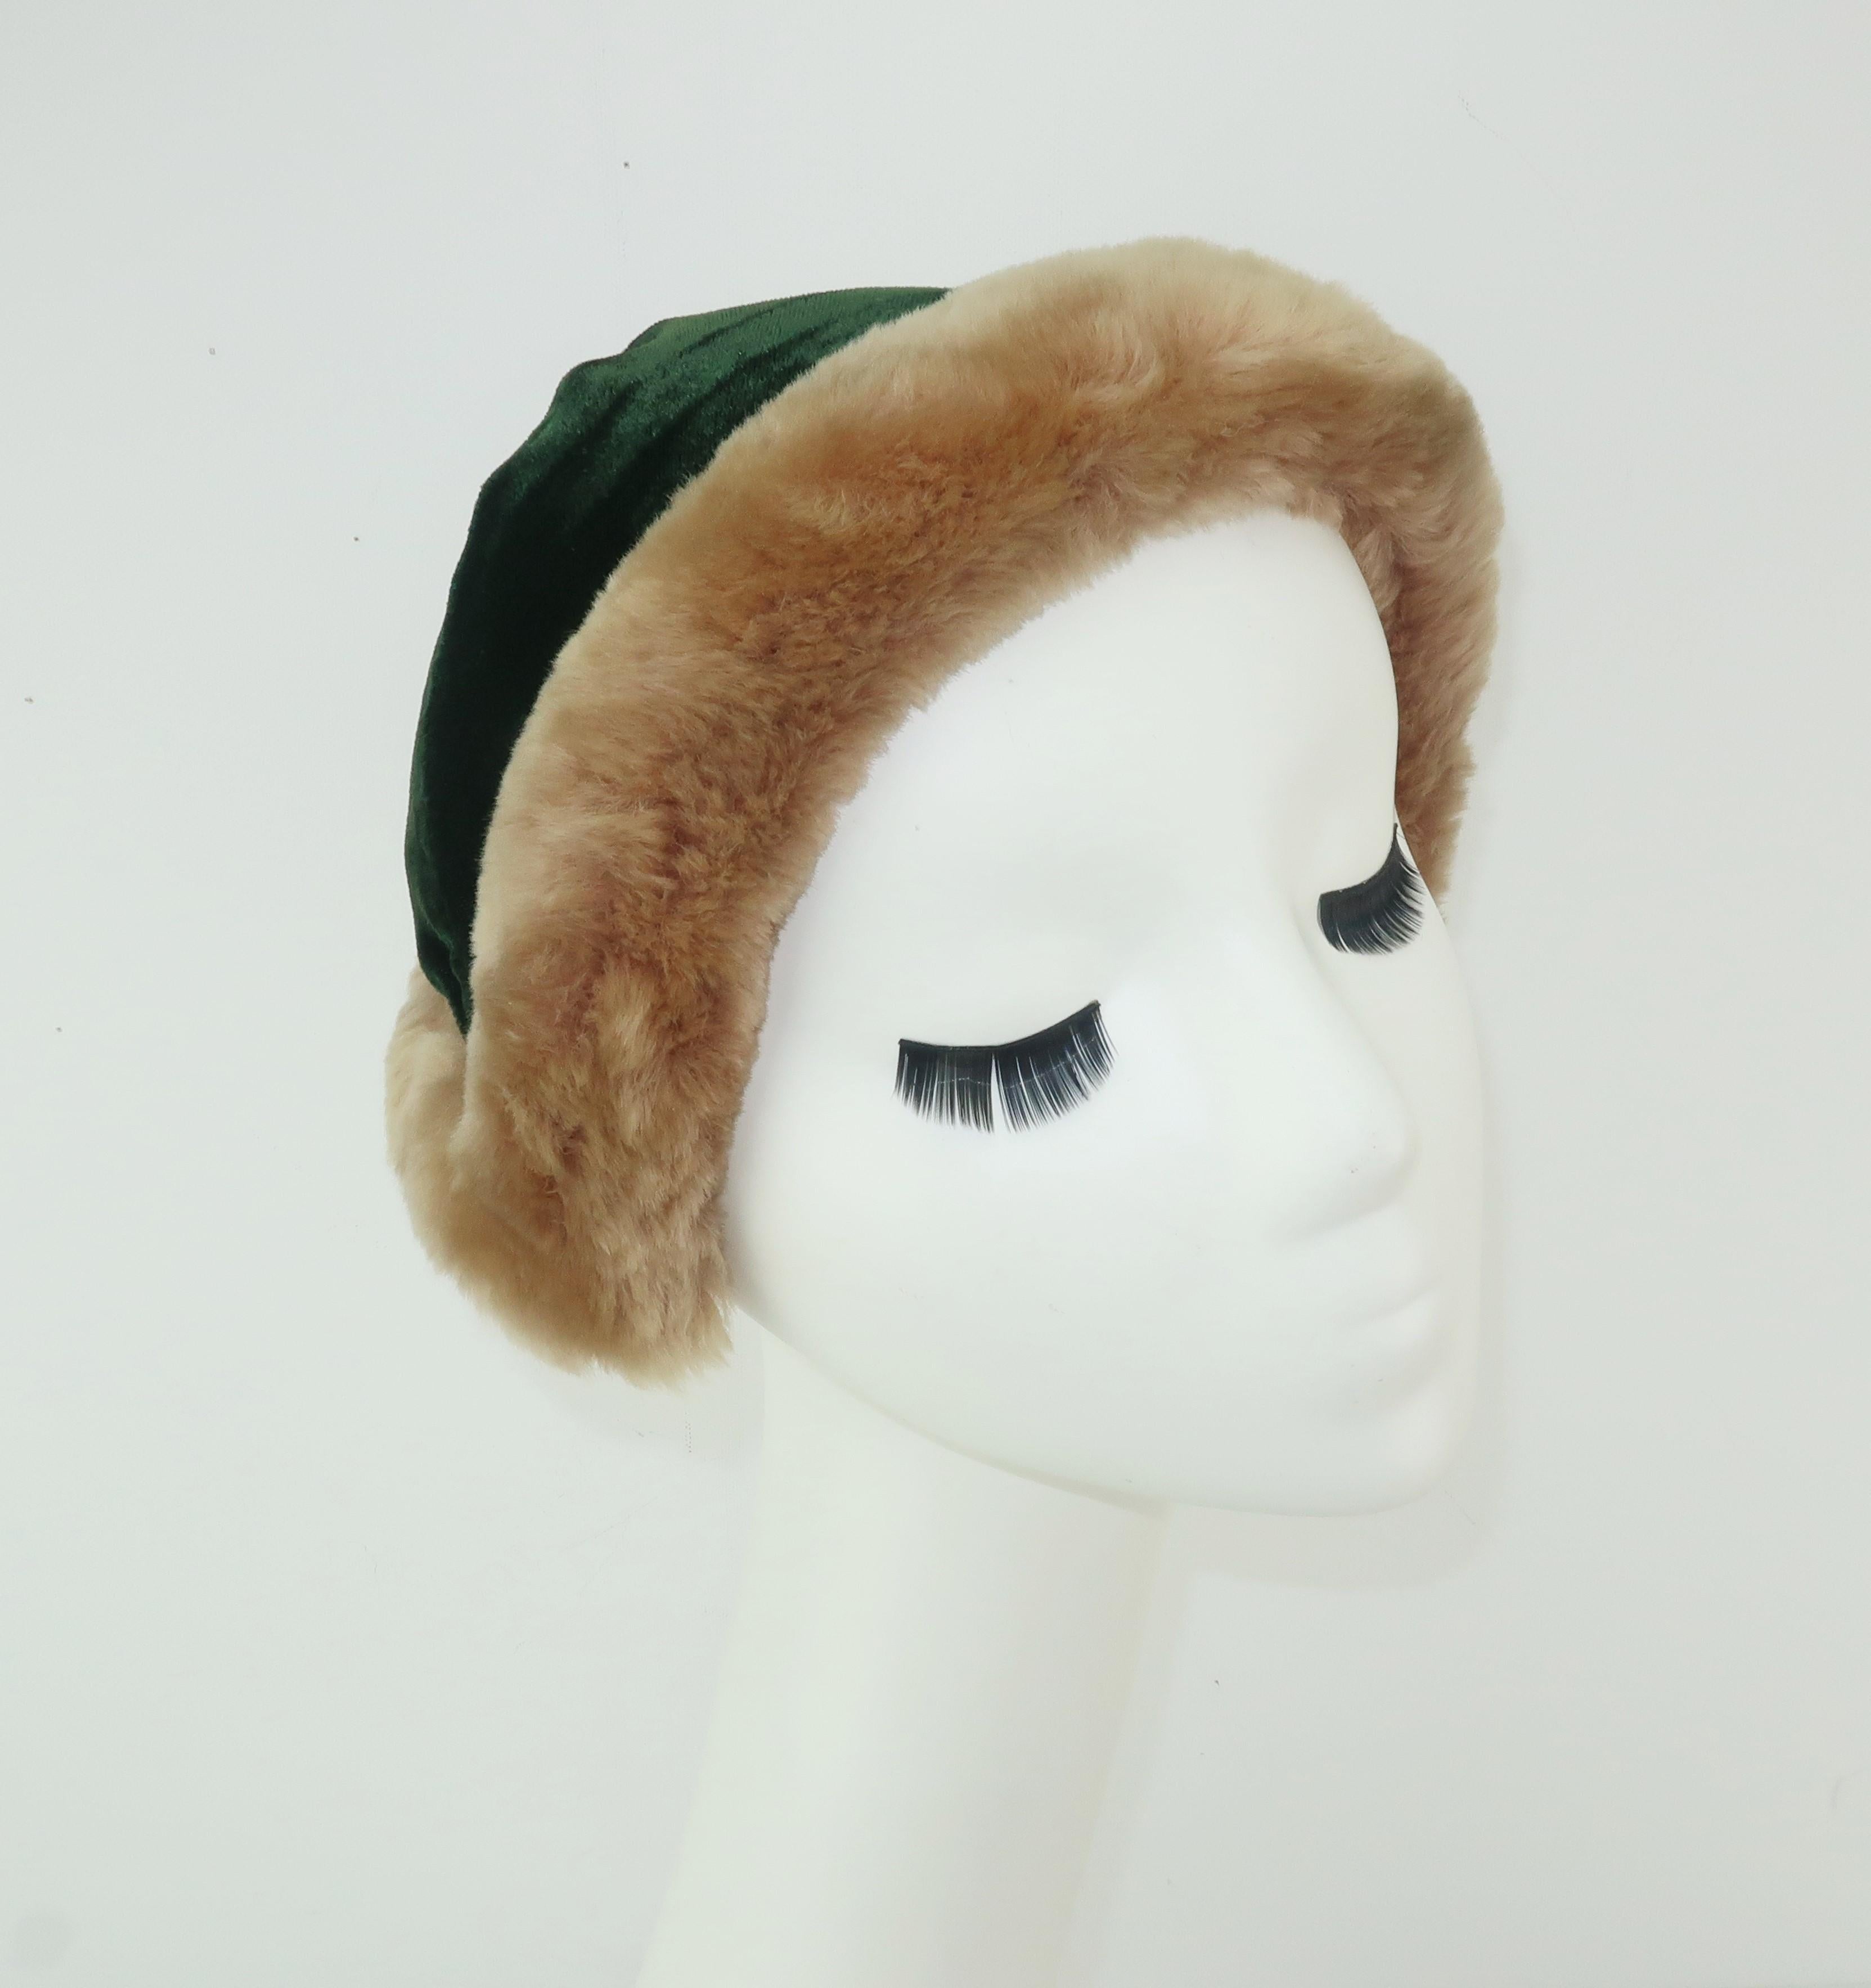 This adorable C.1950 hat conjures up images of princess coats, muffs and ice skating in the park.  The lush dark green velvet body is backed by black faille fabric and trimmed in a fawn color mouton sheepskin.  The hat is cleverly shaped by a hidden